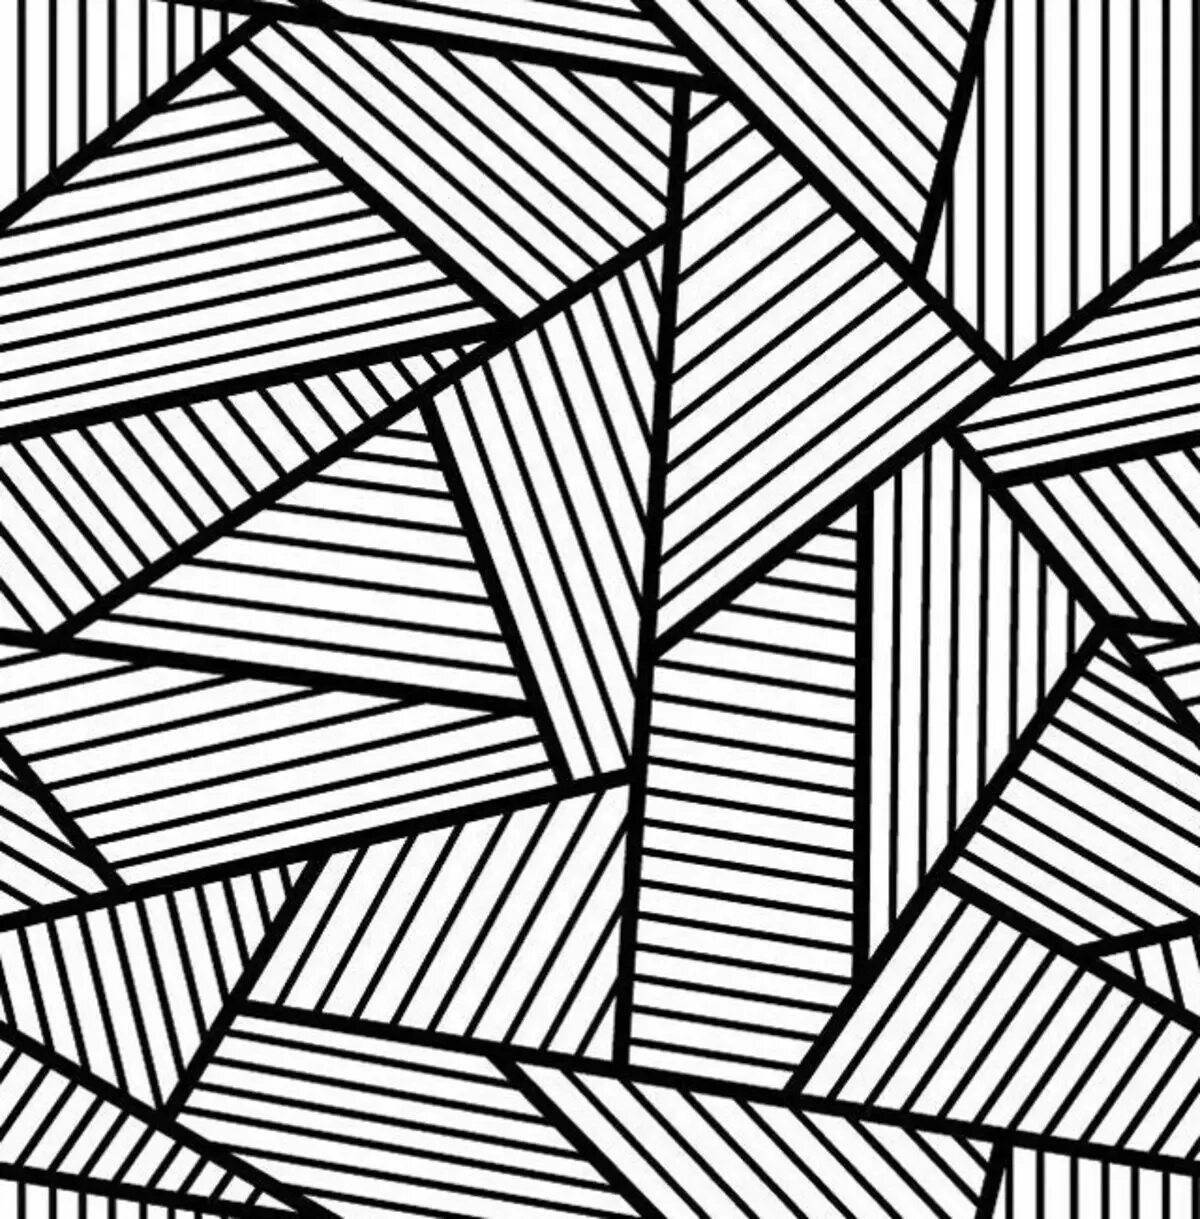 Coloring page with unique geometric pattern